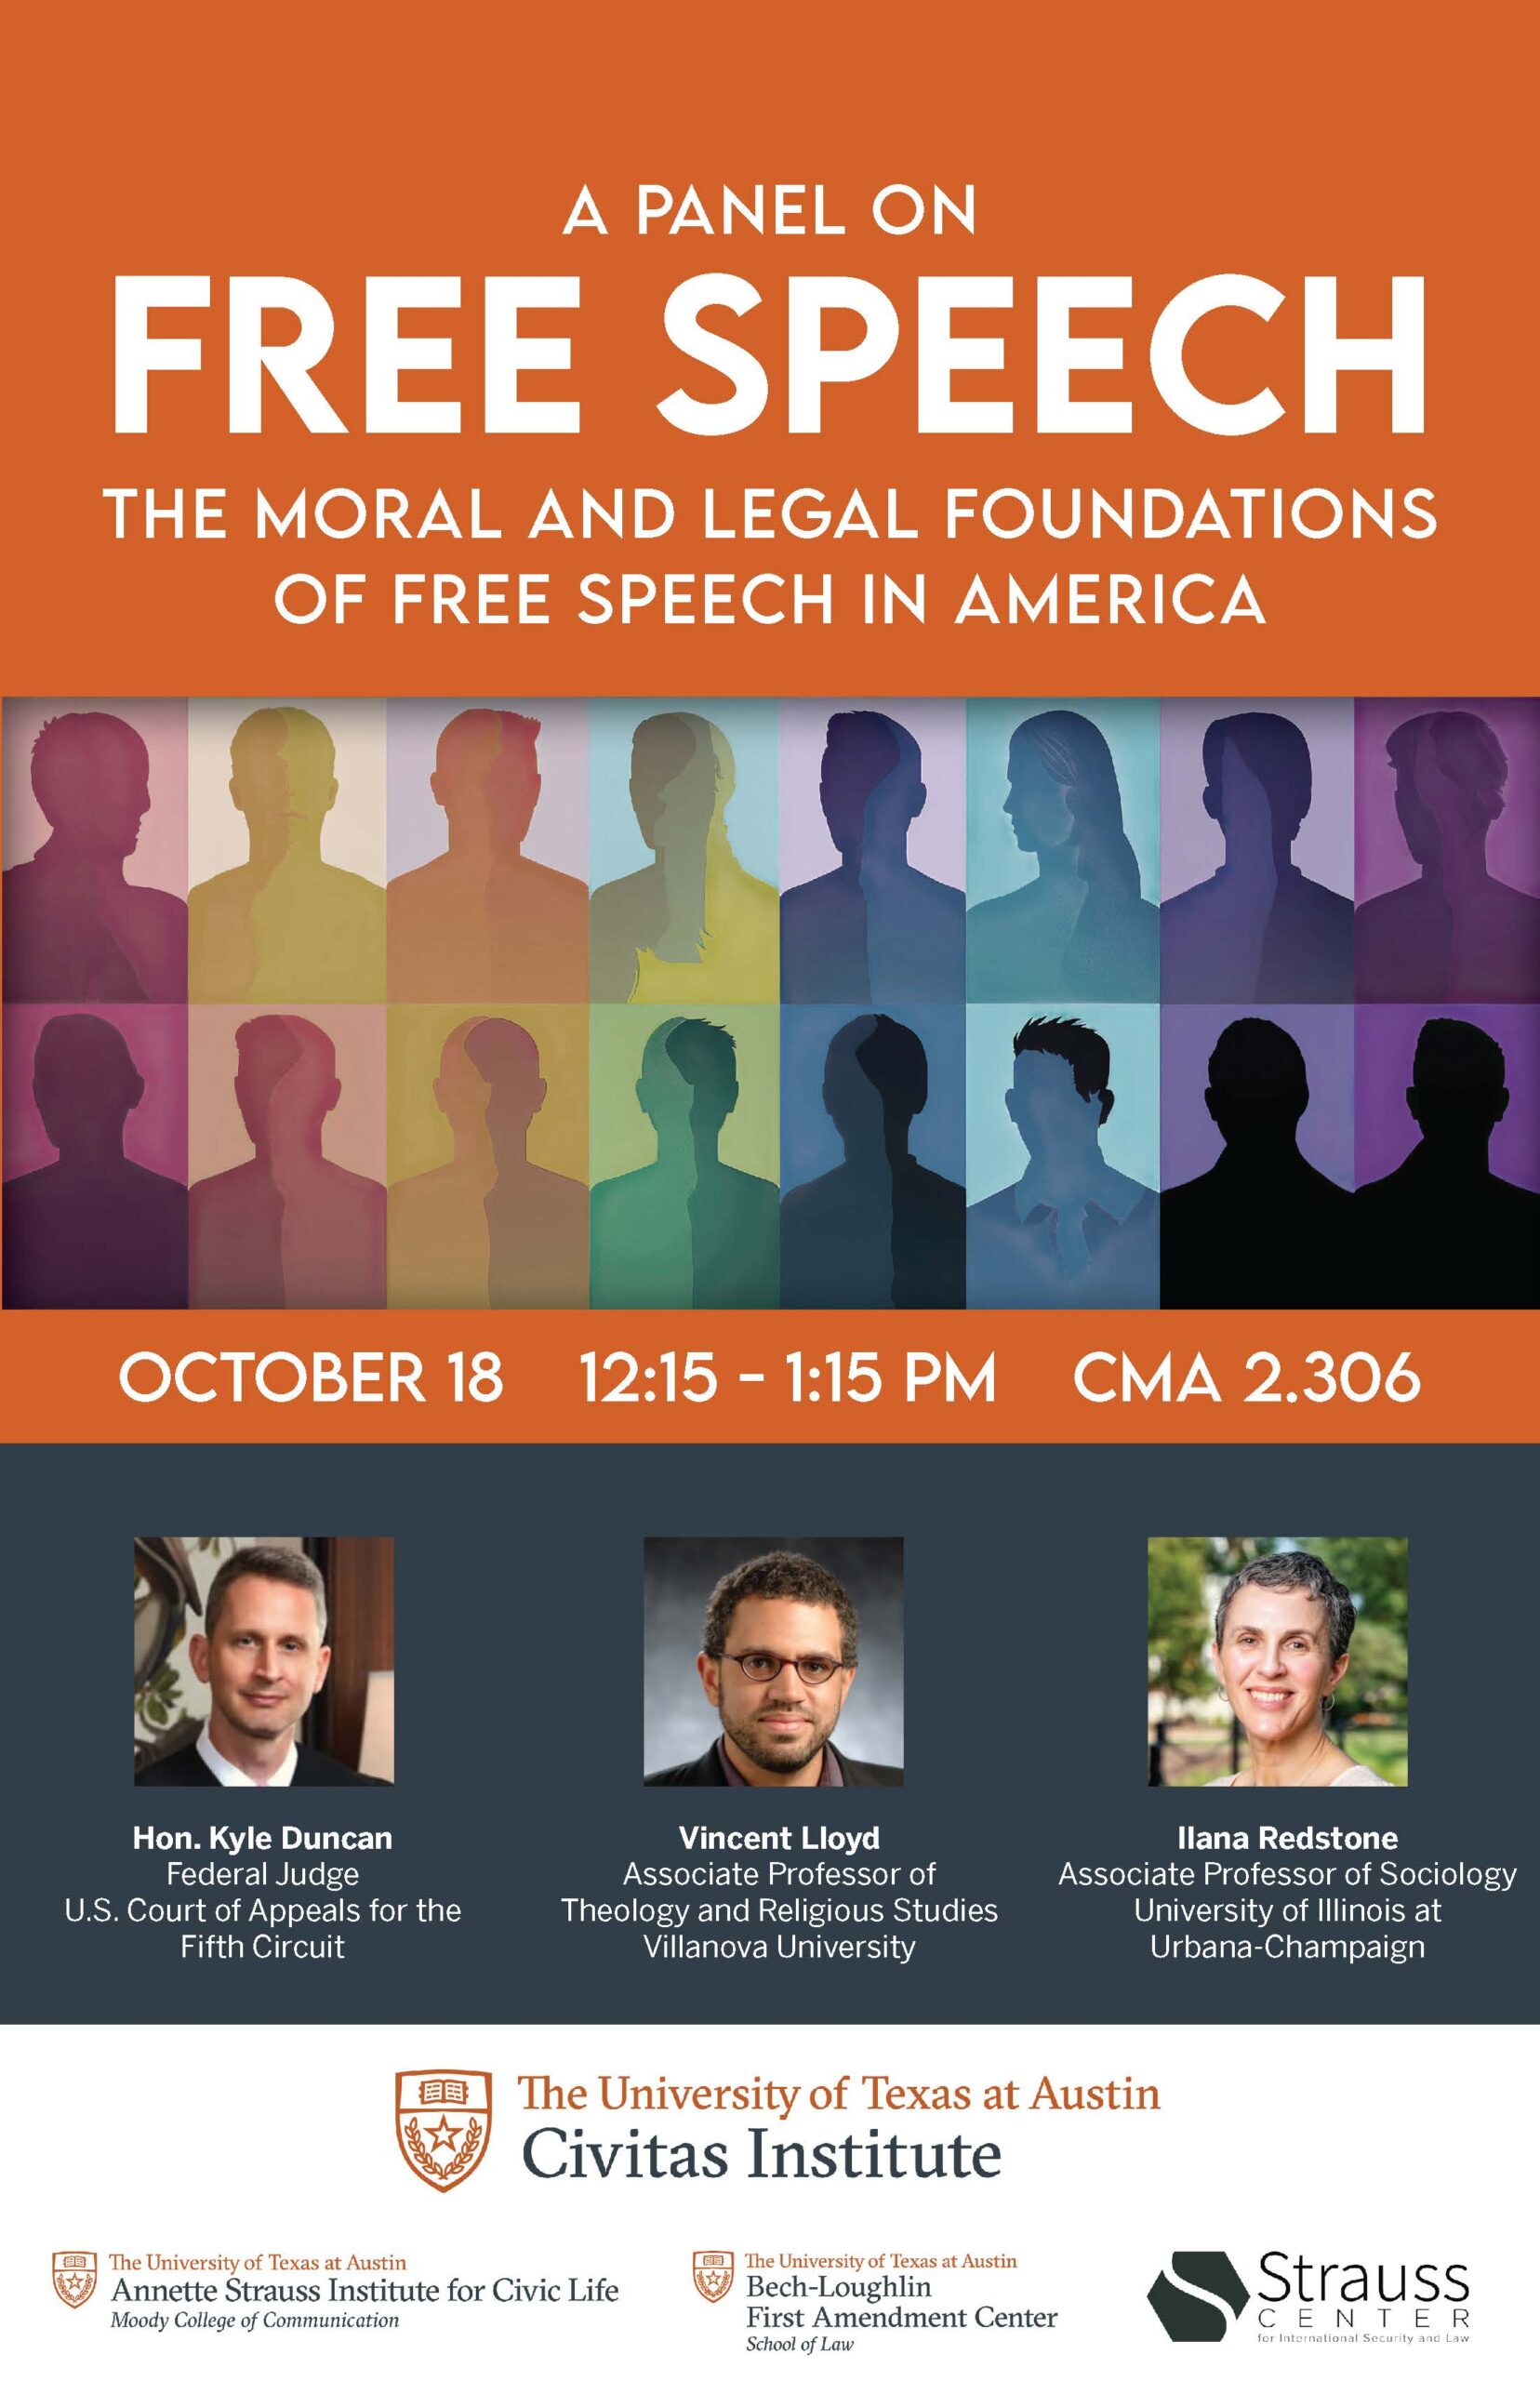 A Panel on Free Speech The Moral and Legal Foundations of Free speech in america October 18 12:15 - 1:15 pm CMA 2.306 Hon. Kyle Duncan Federal Judge U.S. Court of Appeals for the Fifth Circuit Vincent Lloyd Associate Professor of Theology and Religious Studies Villanova University Ilana Redstone Associate Professor of Sociology University of Illinois at Urbana-Champaign